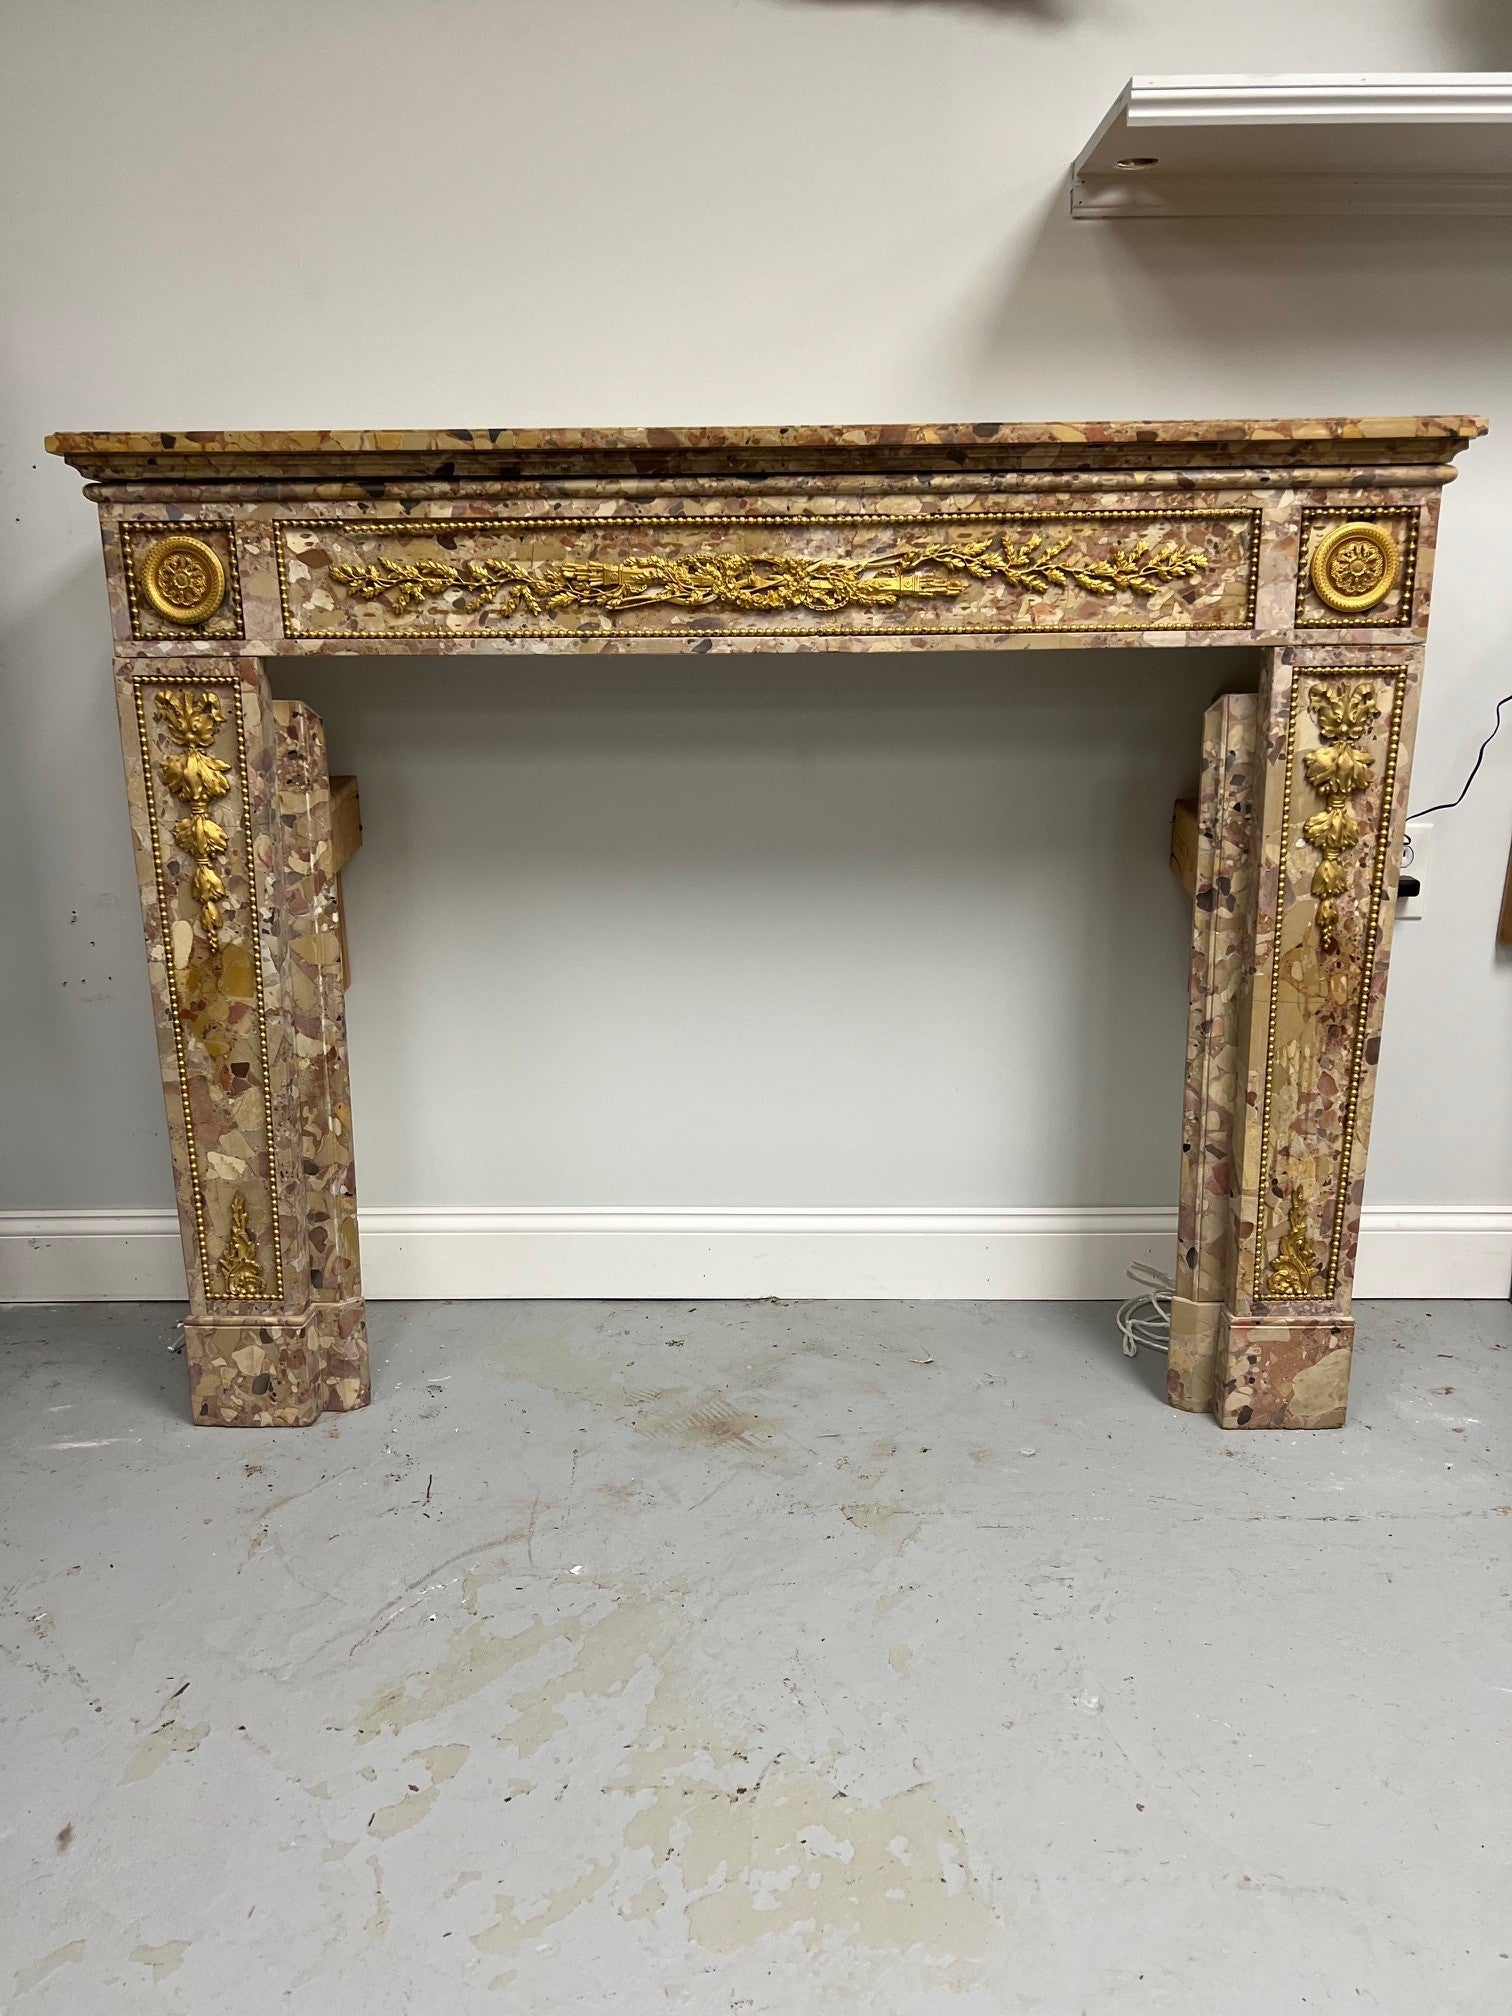 Fabulous Louis XVI antique fireplace mantel in Breche d'Alep marble with beautiful bronze ormolu enrichments. A deep and generous mantel above with beautiful designs in the marble make this a very good looking fireplace mantel with a rich and